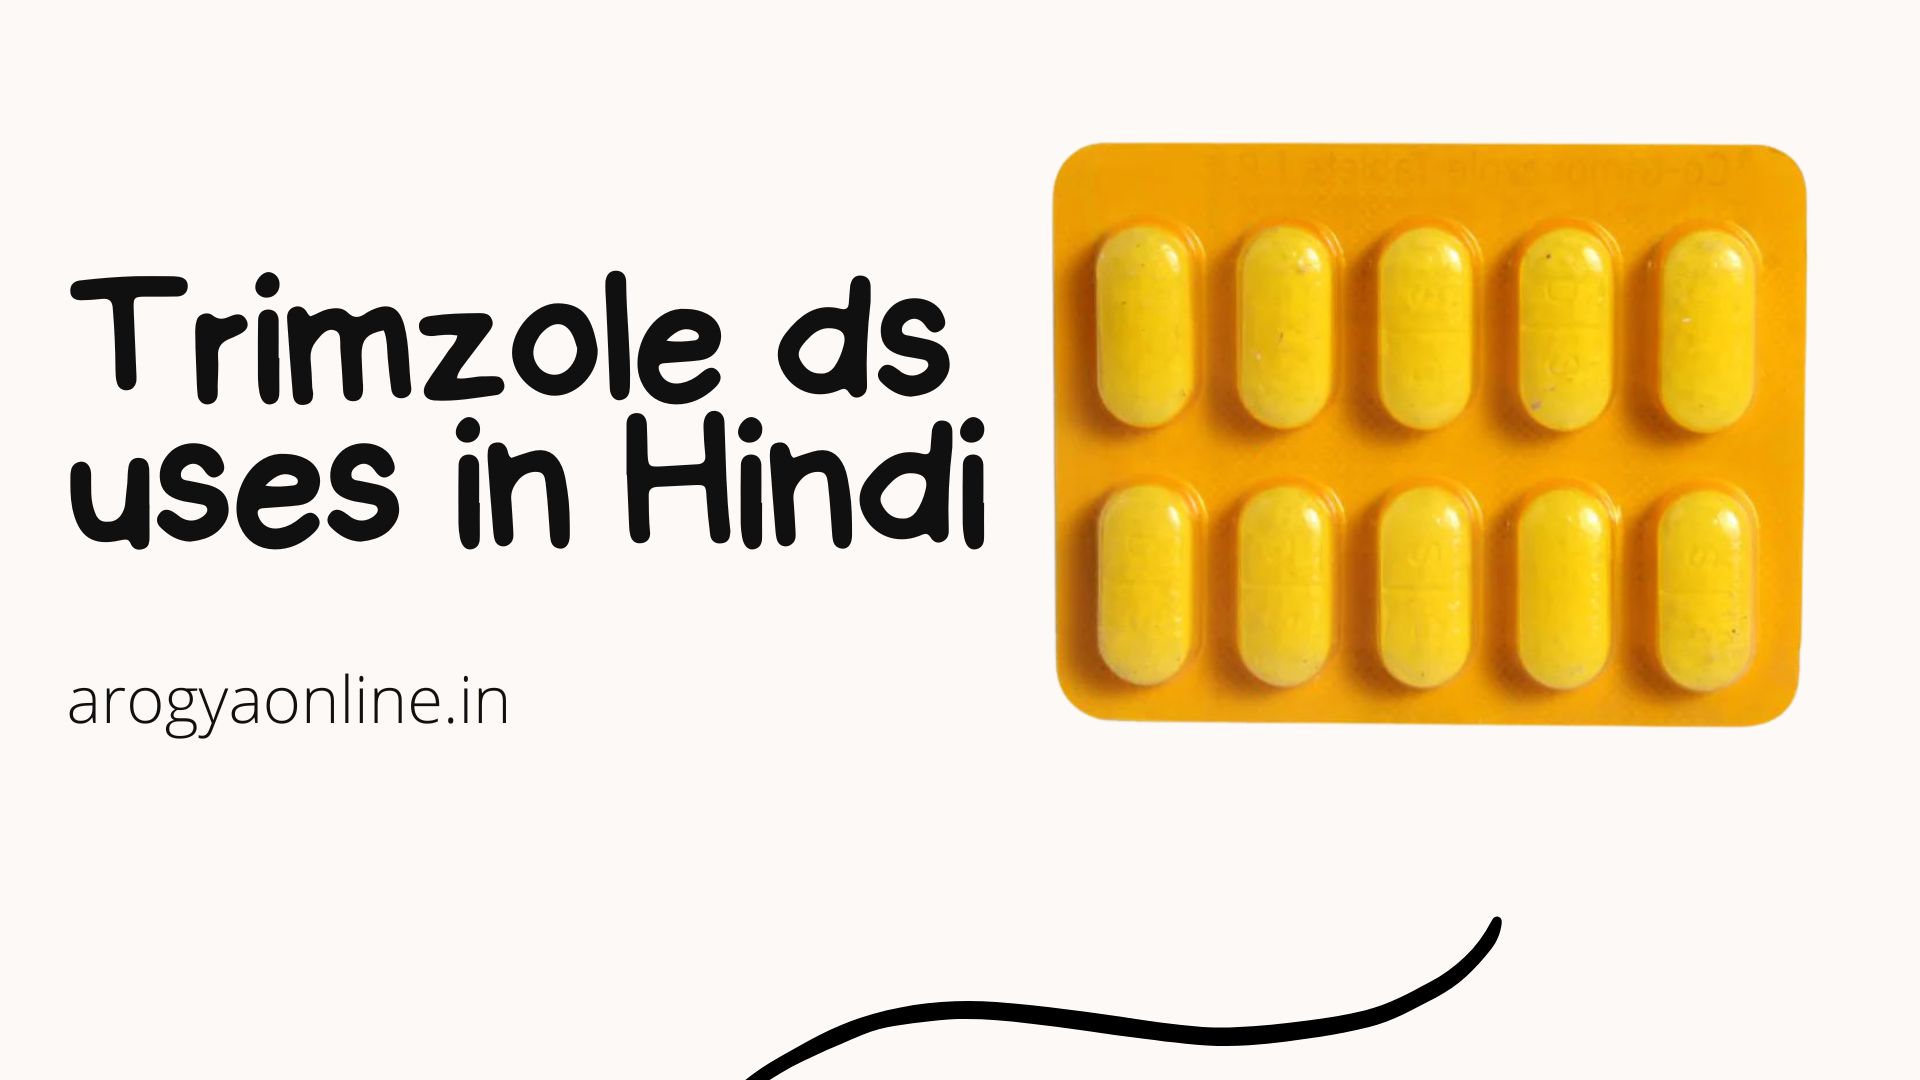 trimzole ds uses in hindi